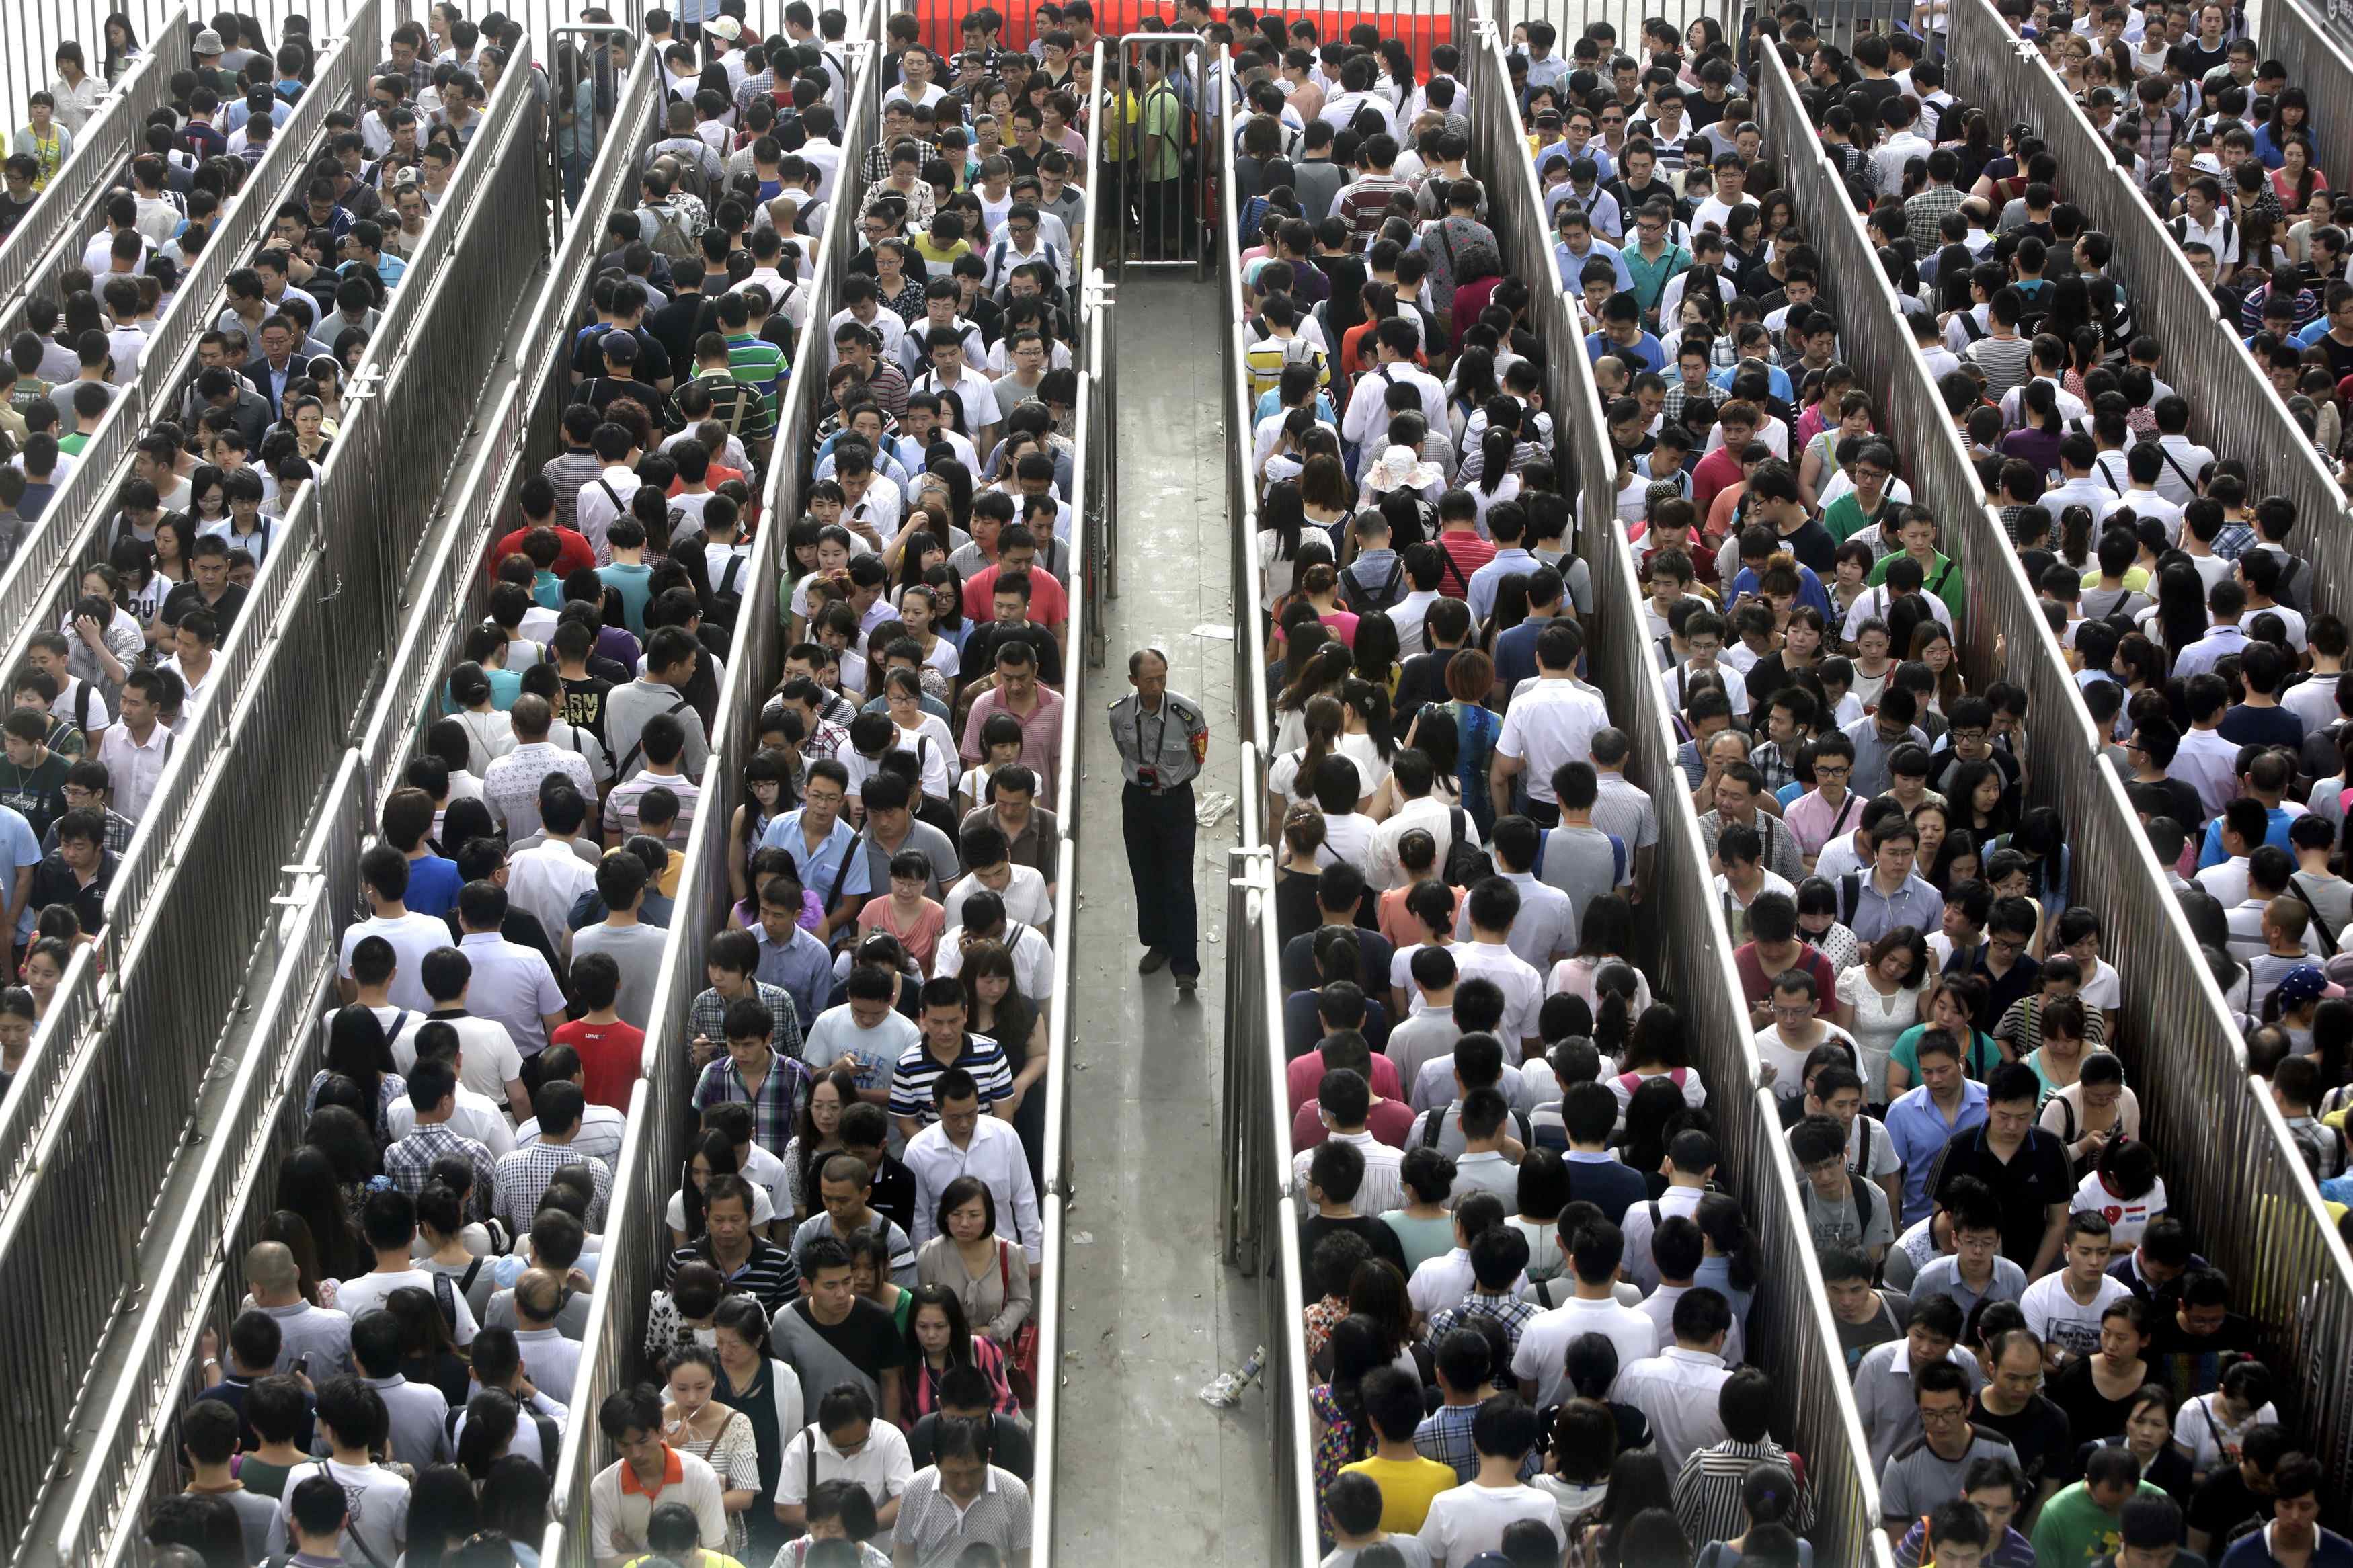 Image: A security officer stands guard as passengers line up and wait for a security check during morning rush hour at Tiantongyuan North Station in Beijing